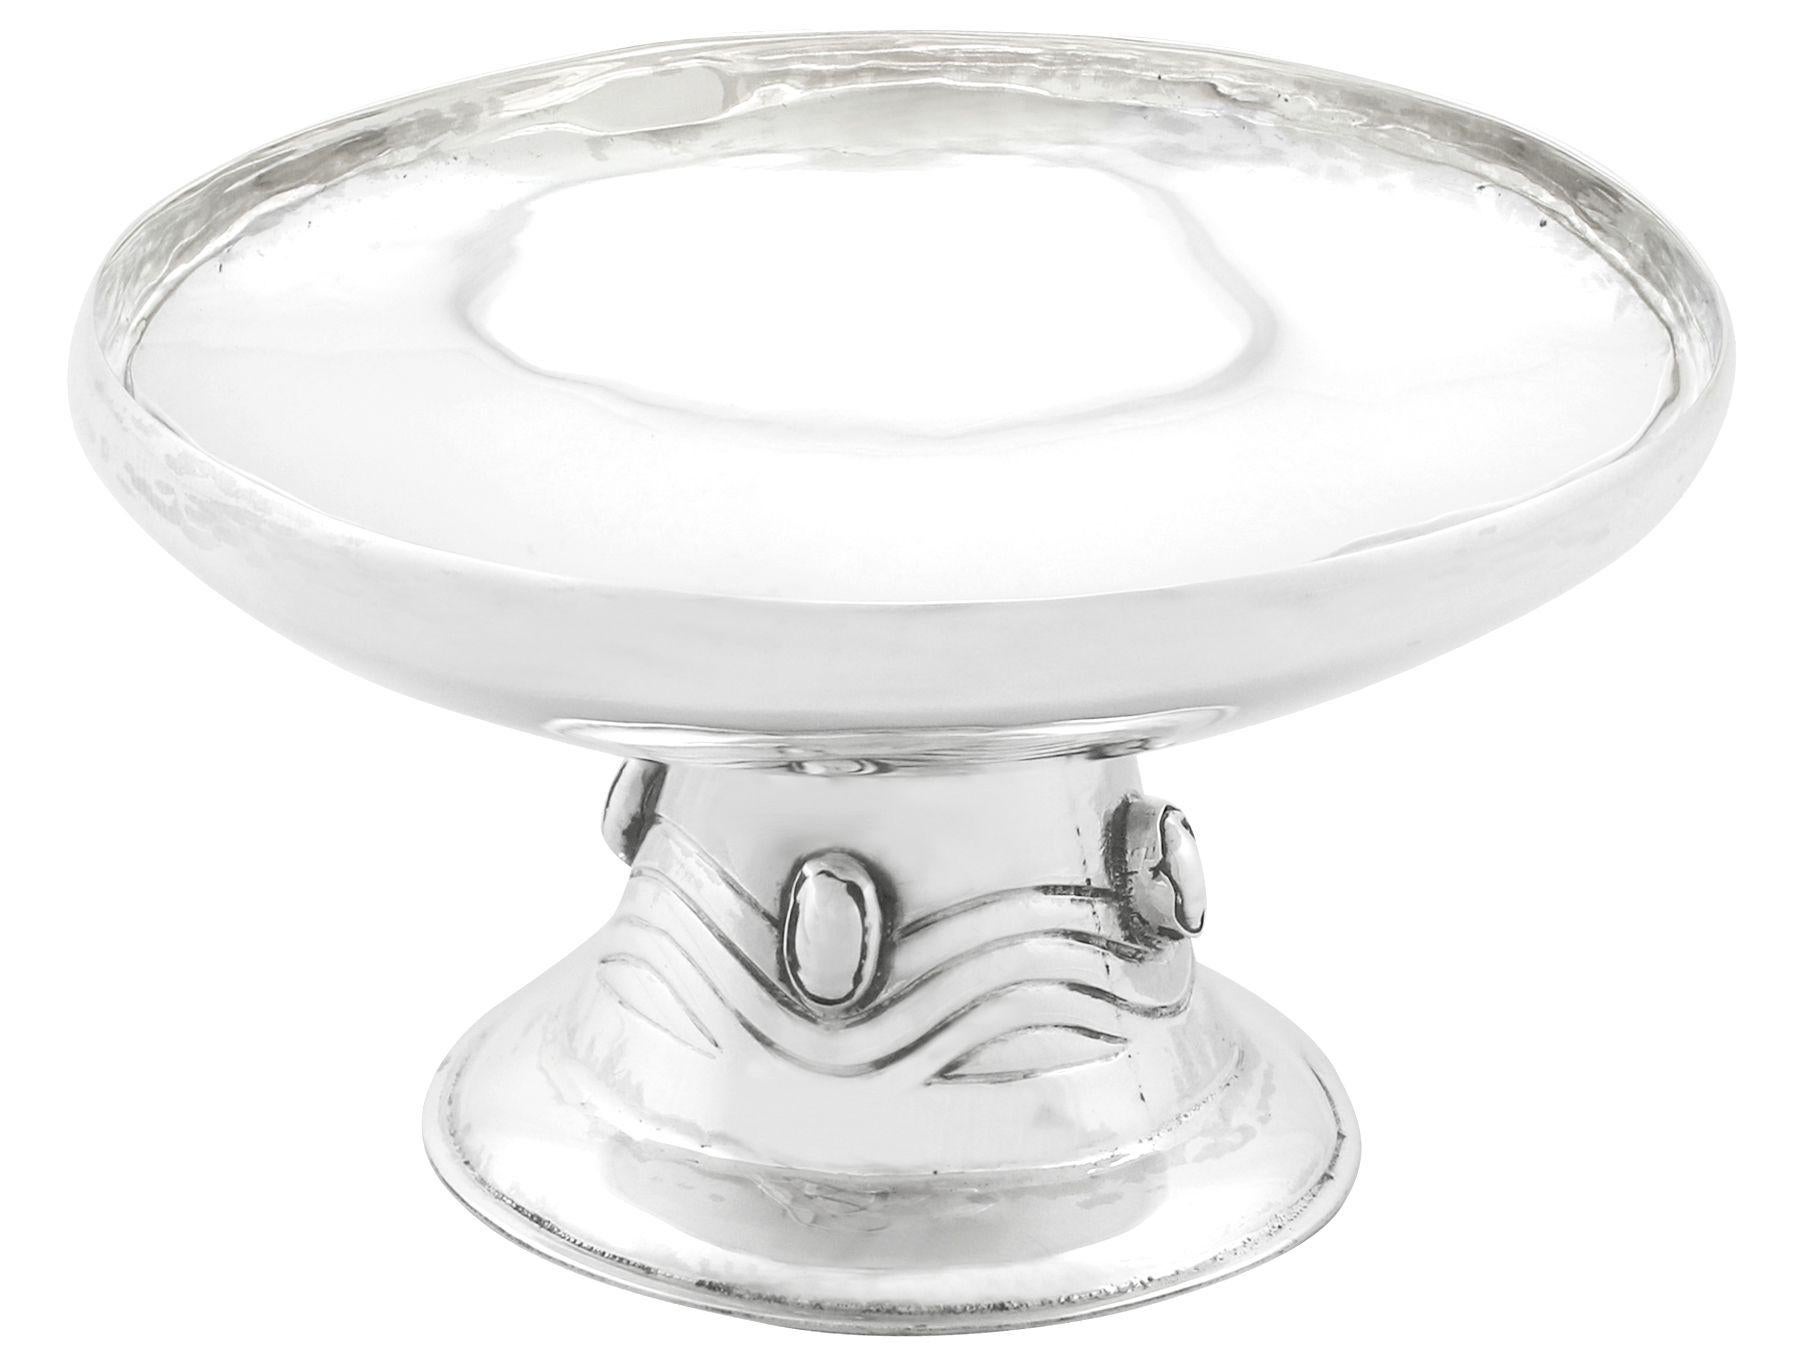 An exceptional, fine and impressive antique Edwardian English sterling silver bon bon dish made in the Arts & Crafts style; an addition to our silver dining collection

This exceptional antique silver bon bon dish, in sterling standard, has a